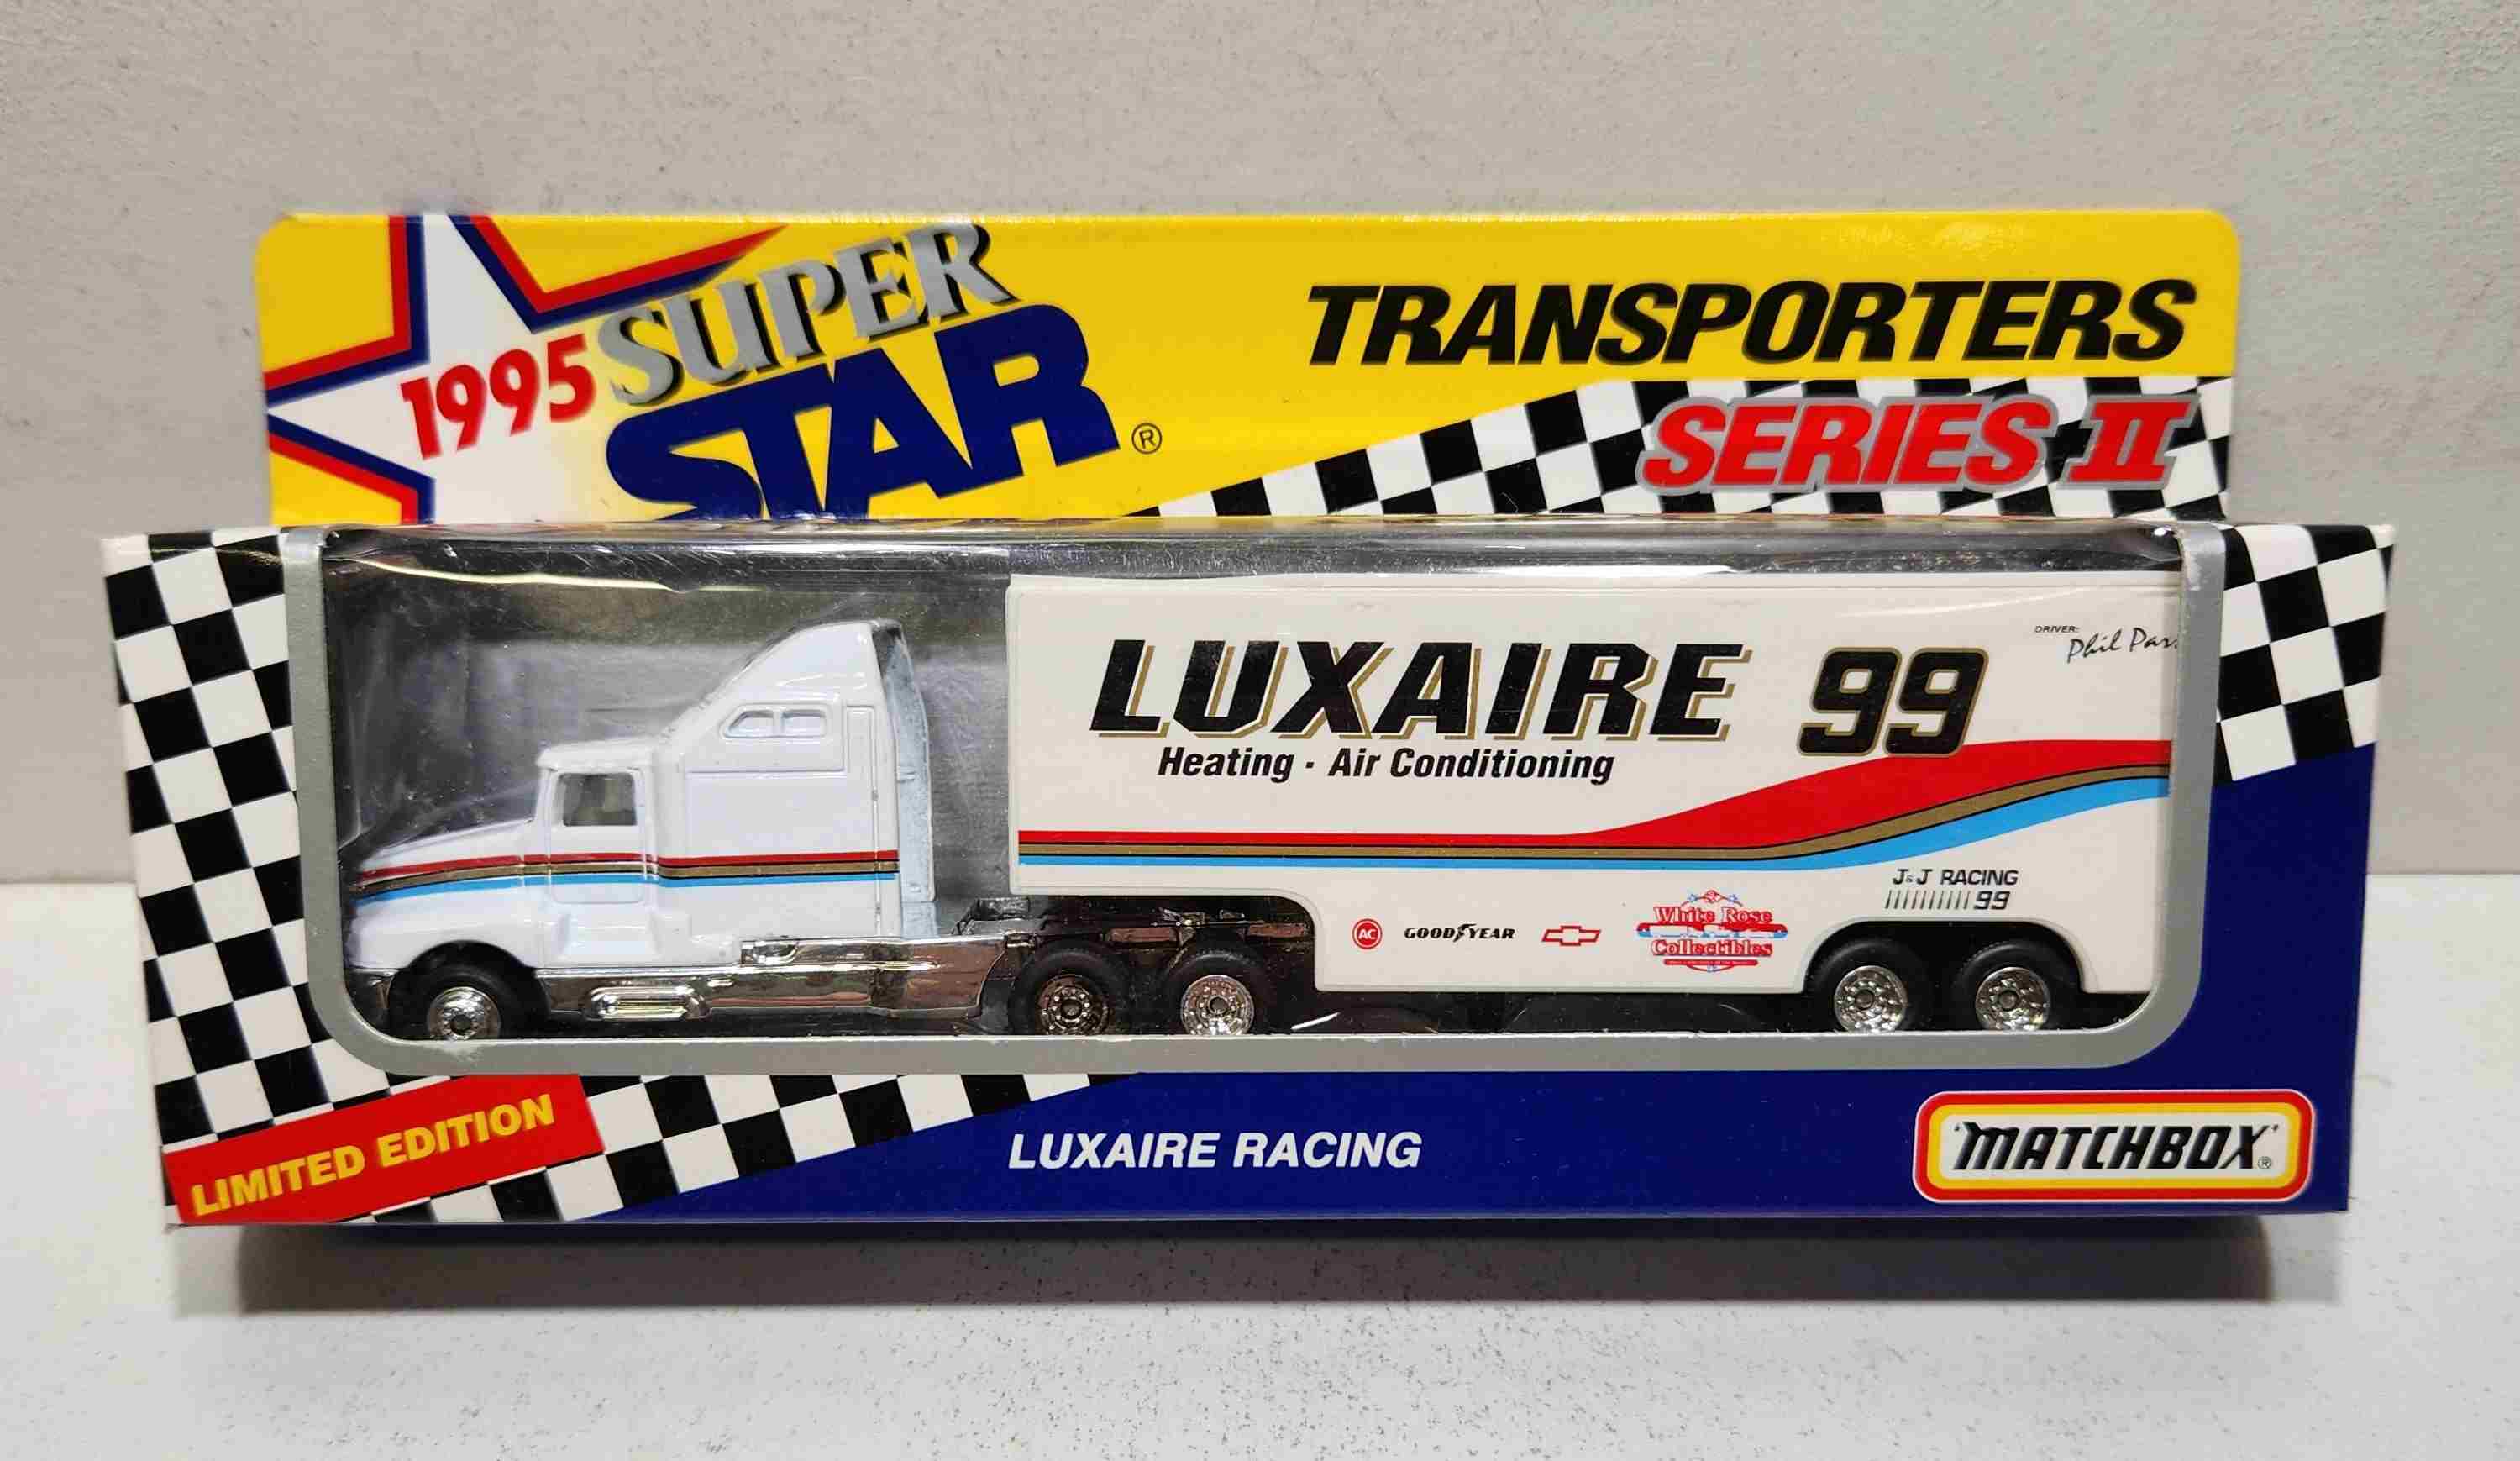 1995 Phil Parsons 1/80th Luxaire "Busch Series" Transporter